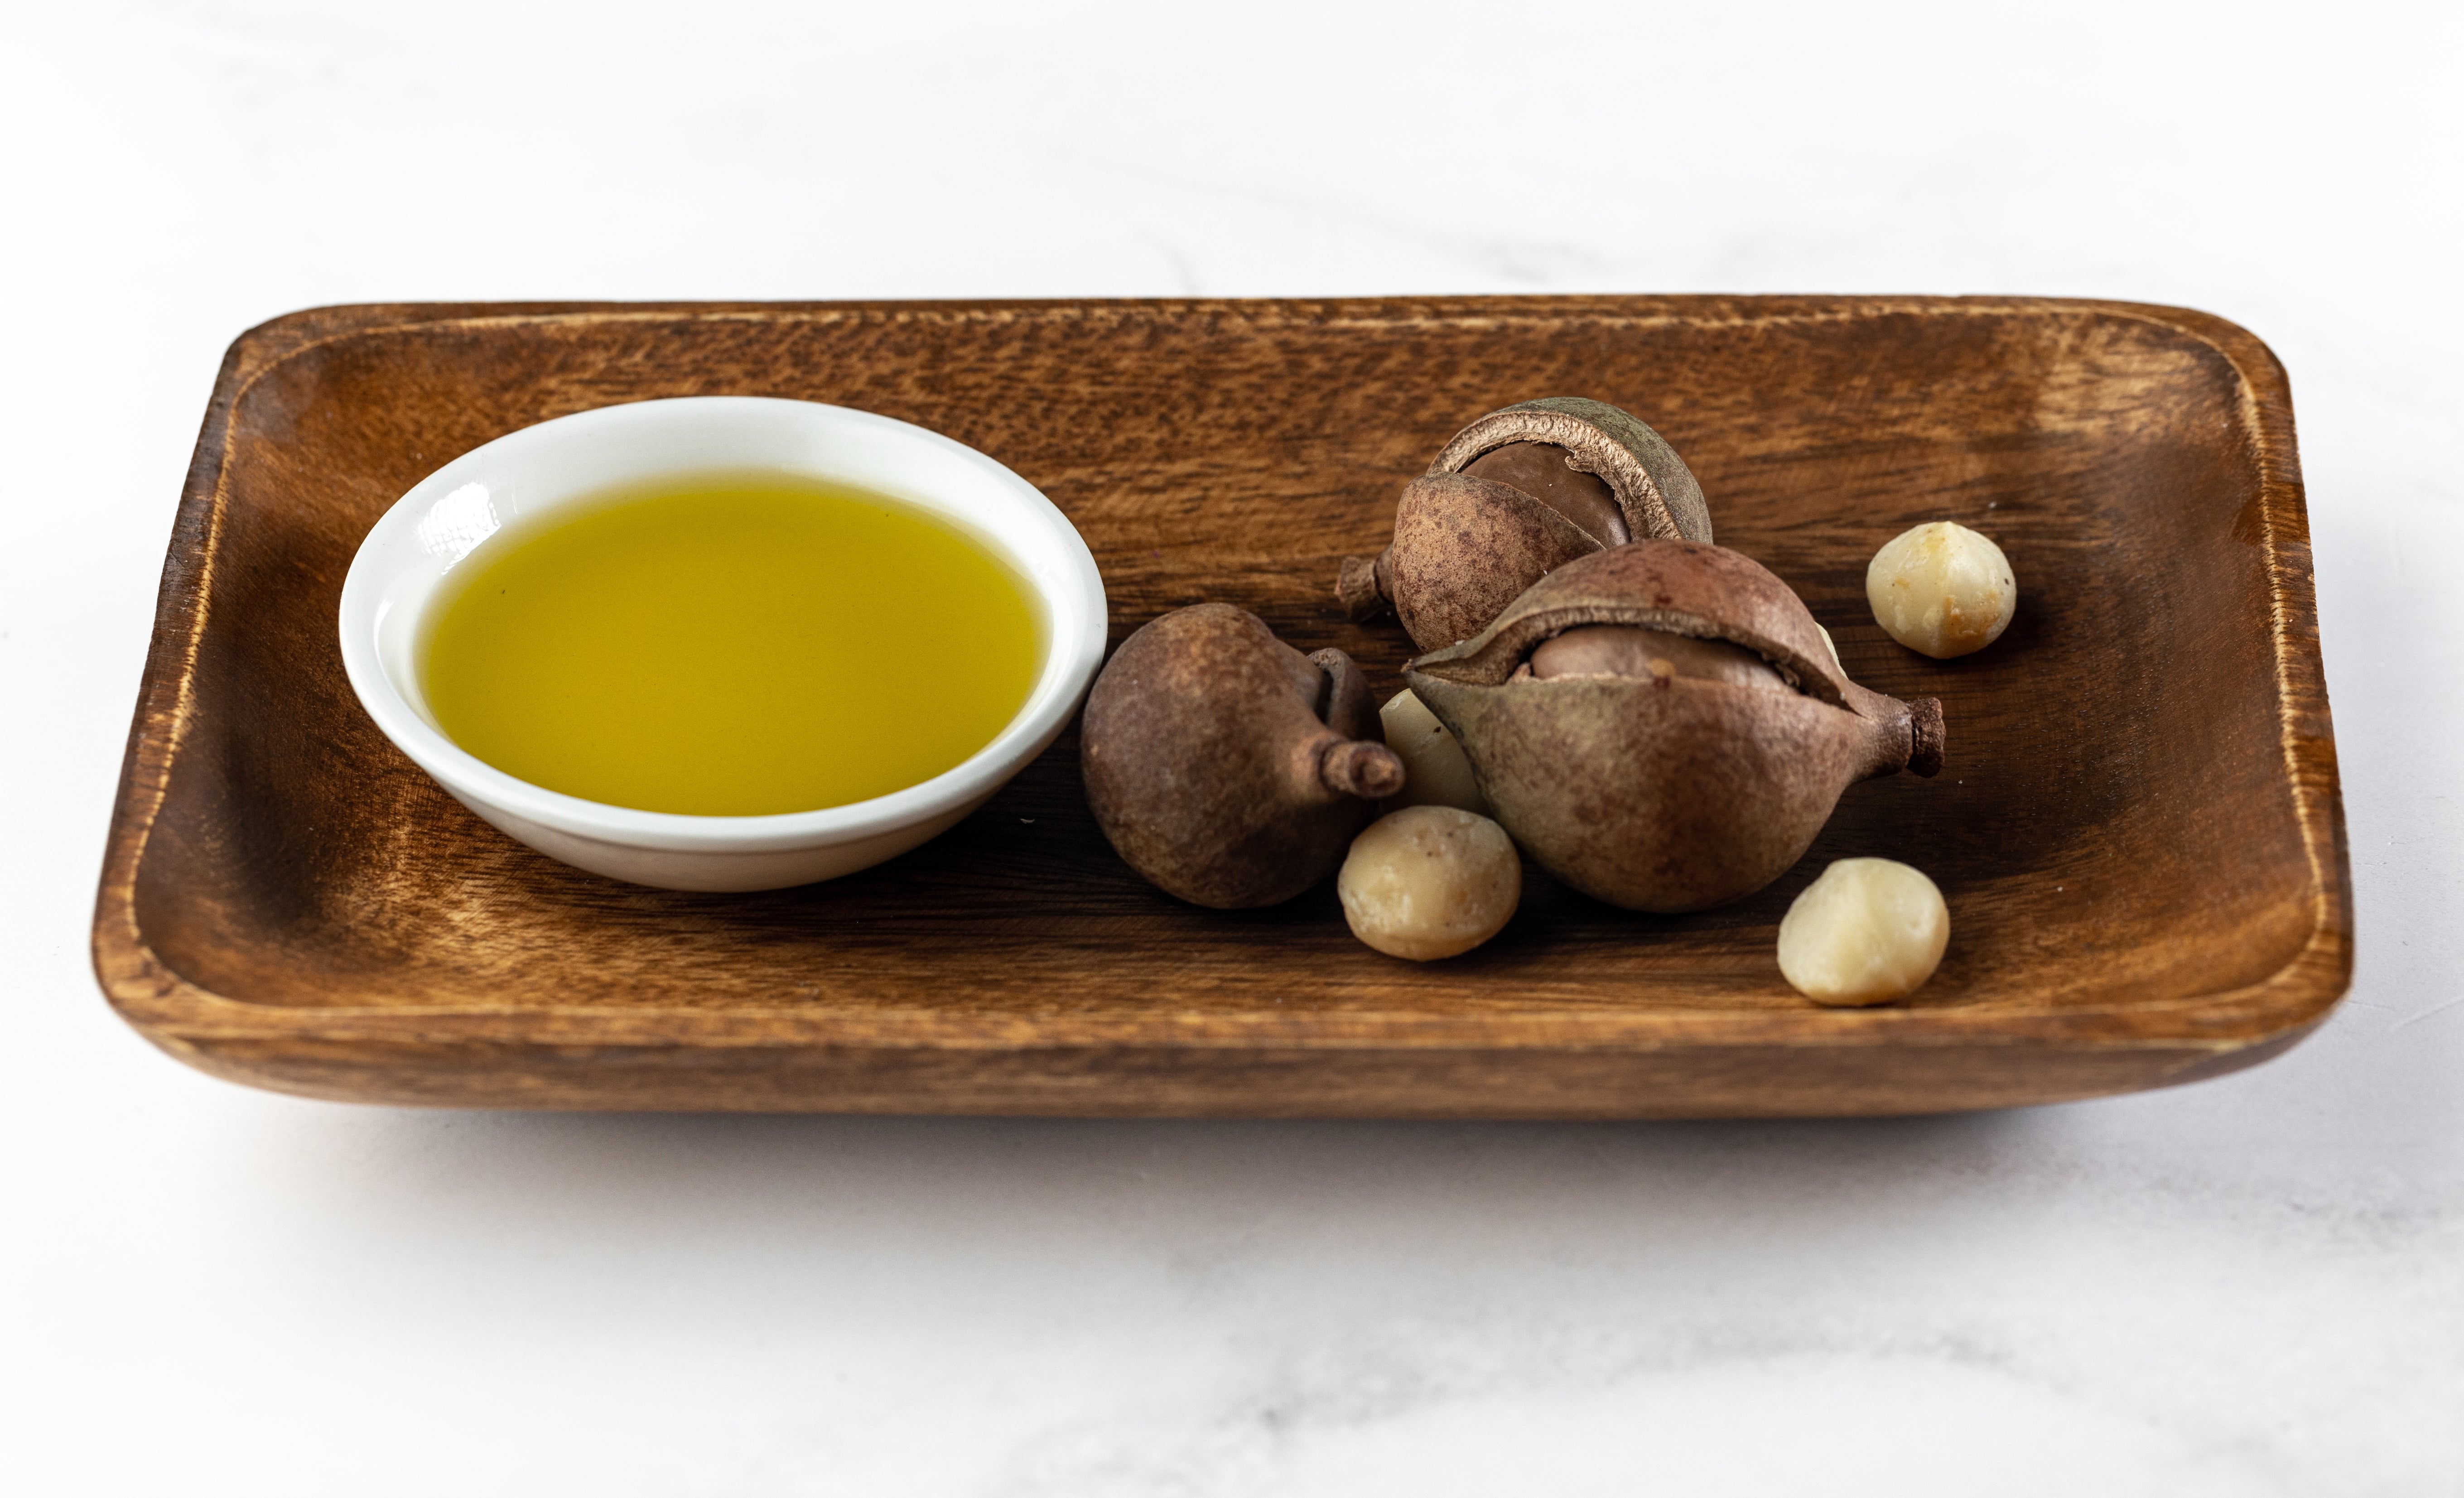 In collaboration with The Noakes Foundation: Study on the health benefits of macadamia nut oil